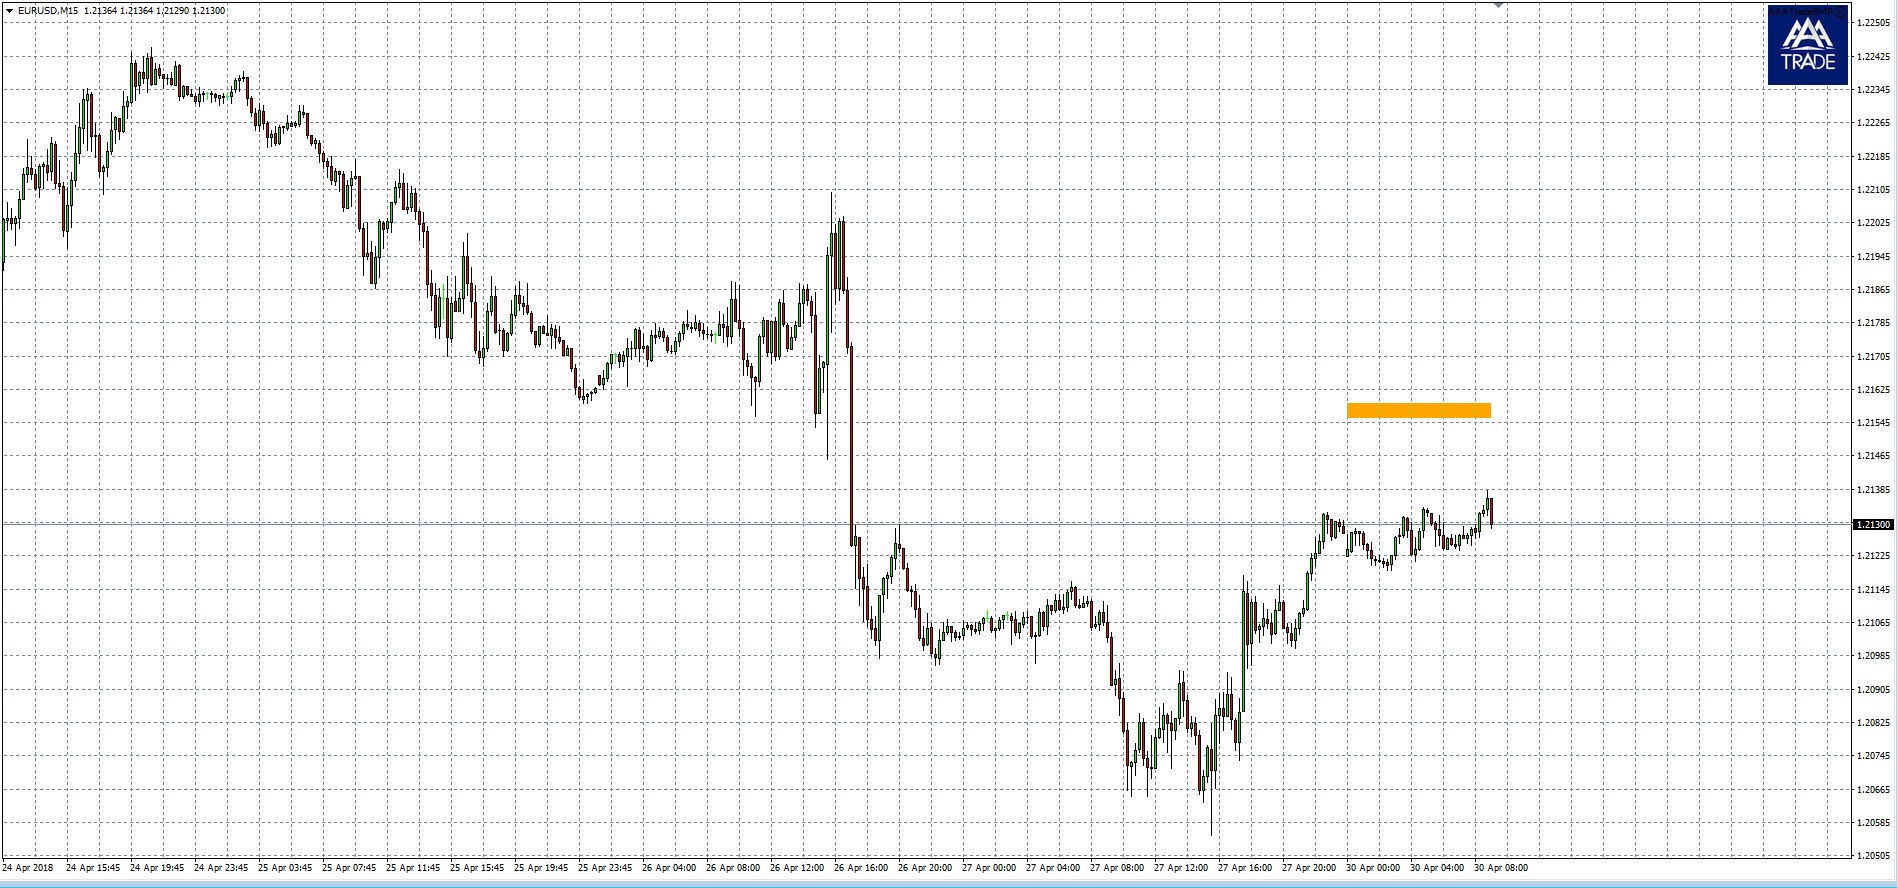 Daily Technical Analysis on EUR-USD